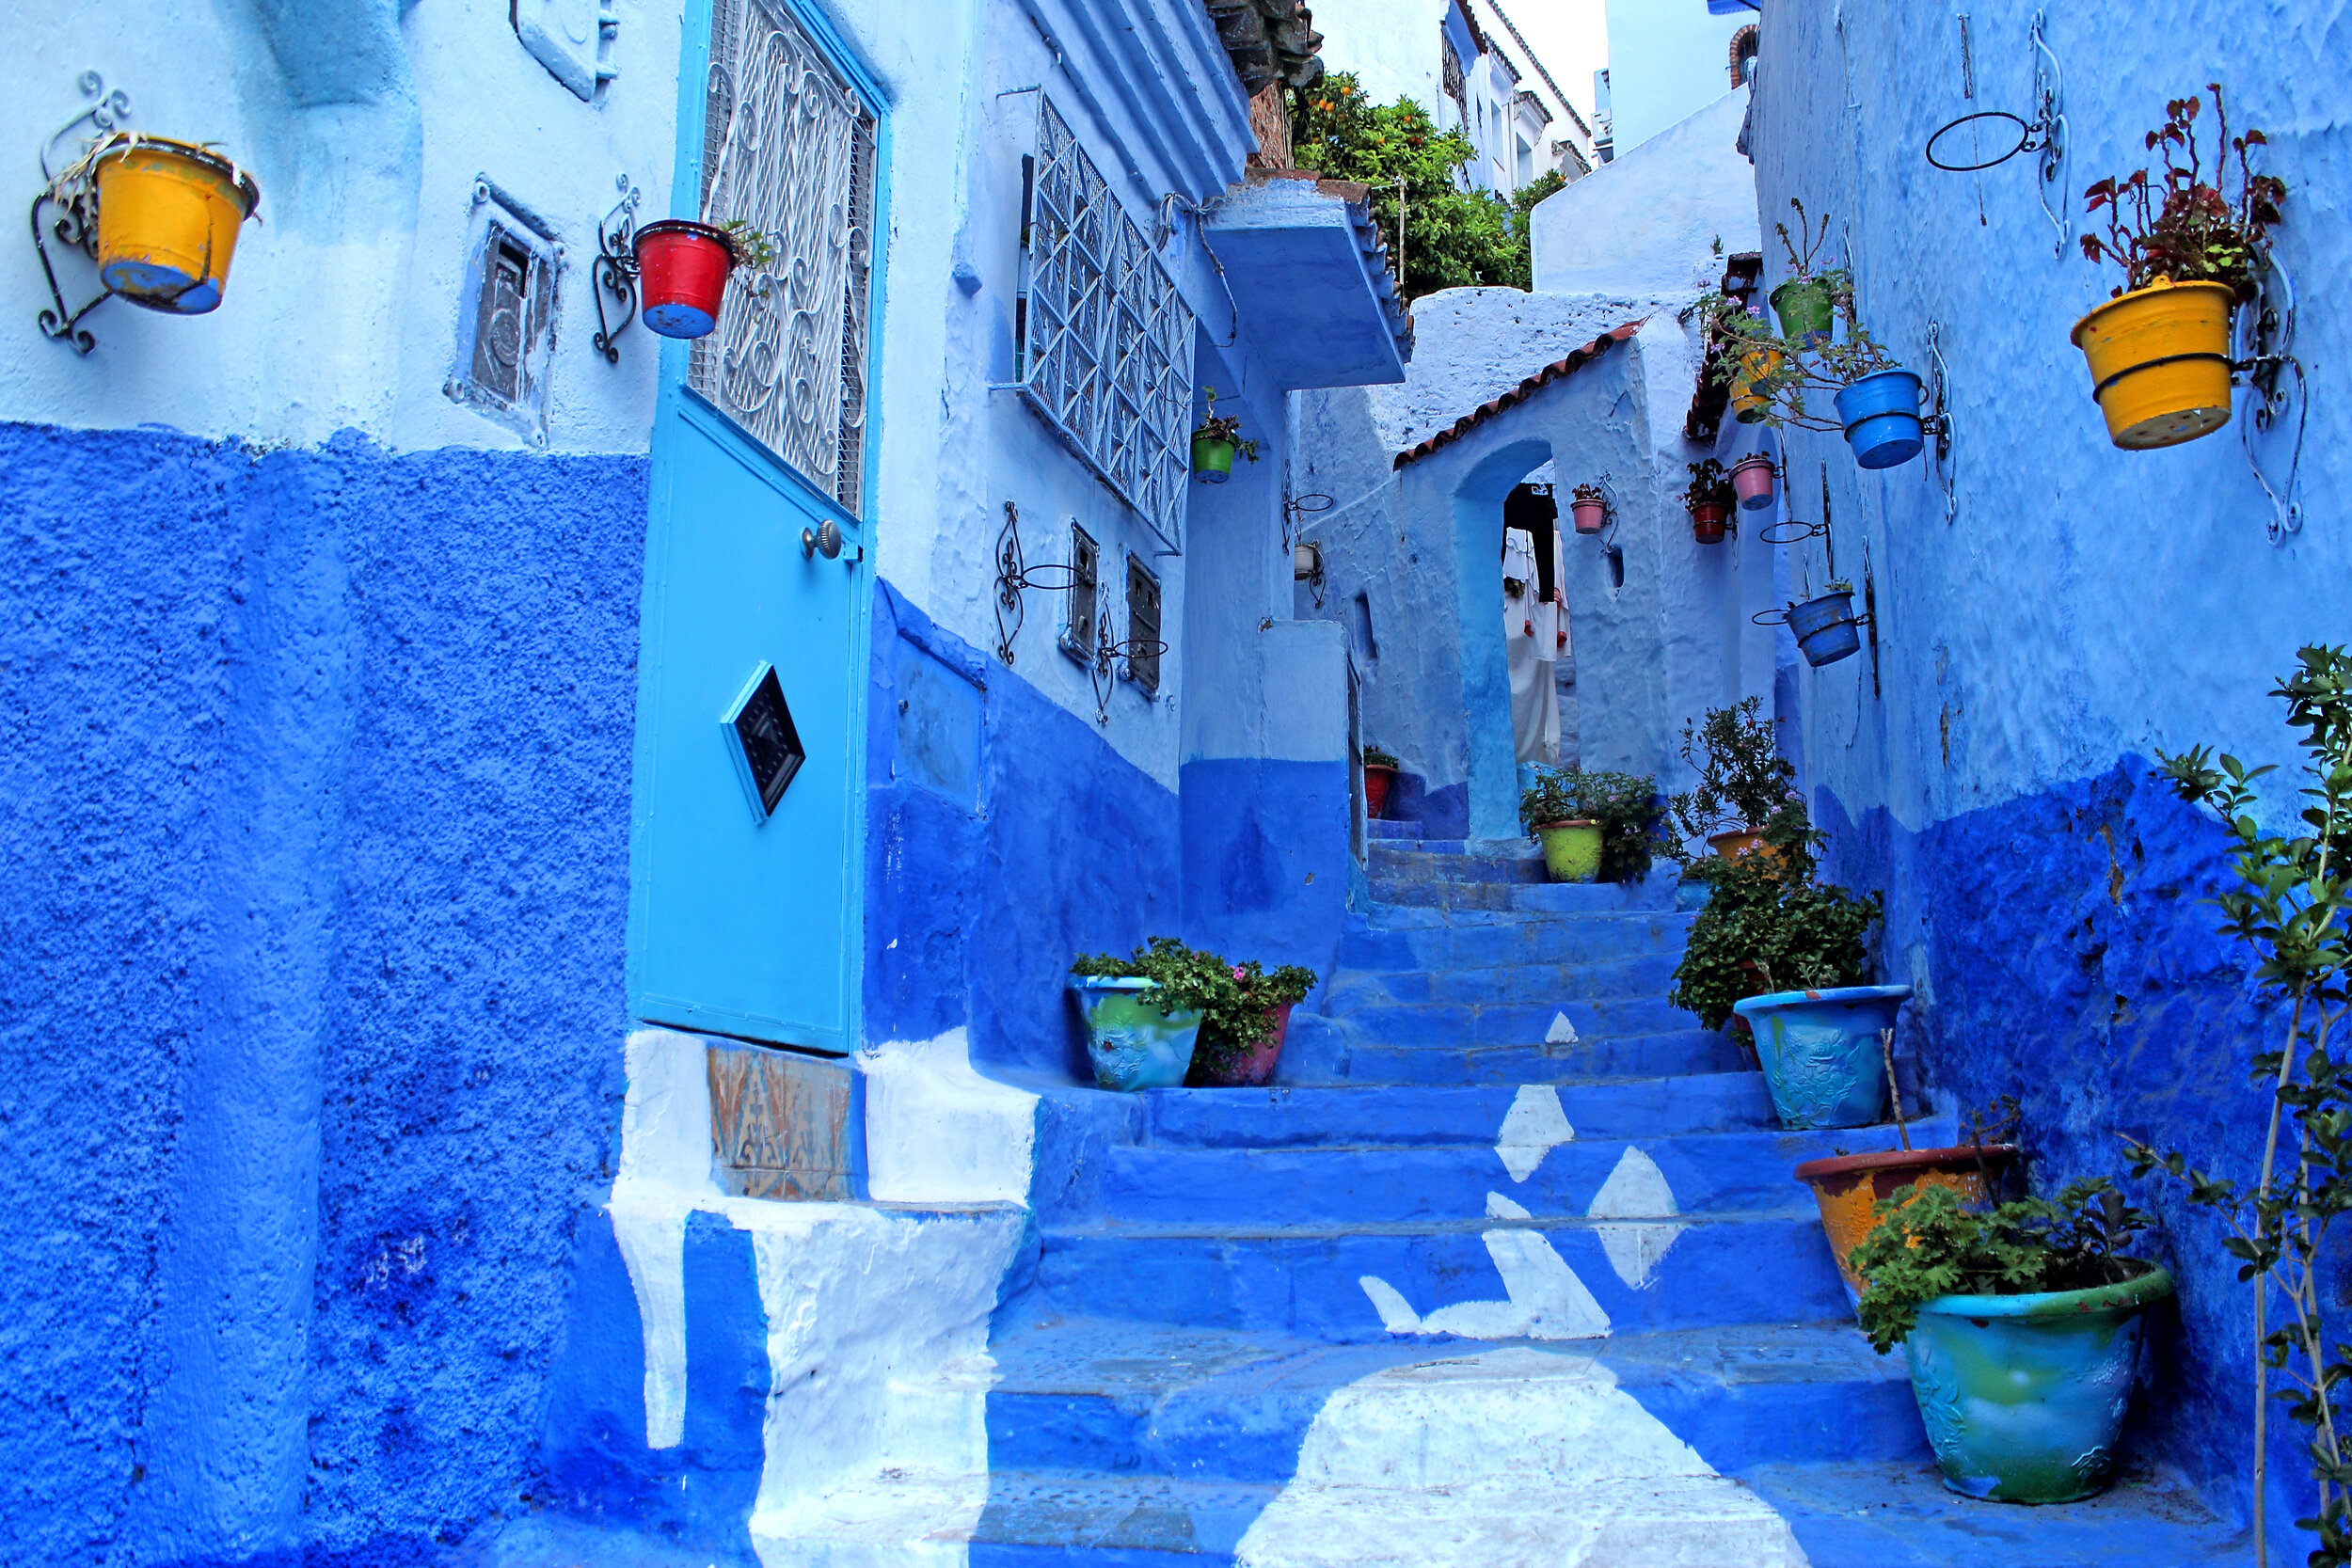  Chefchaouen, Morocco is nicknamed the “blue pearl of Morocco.” 